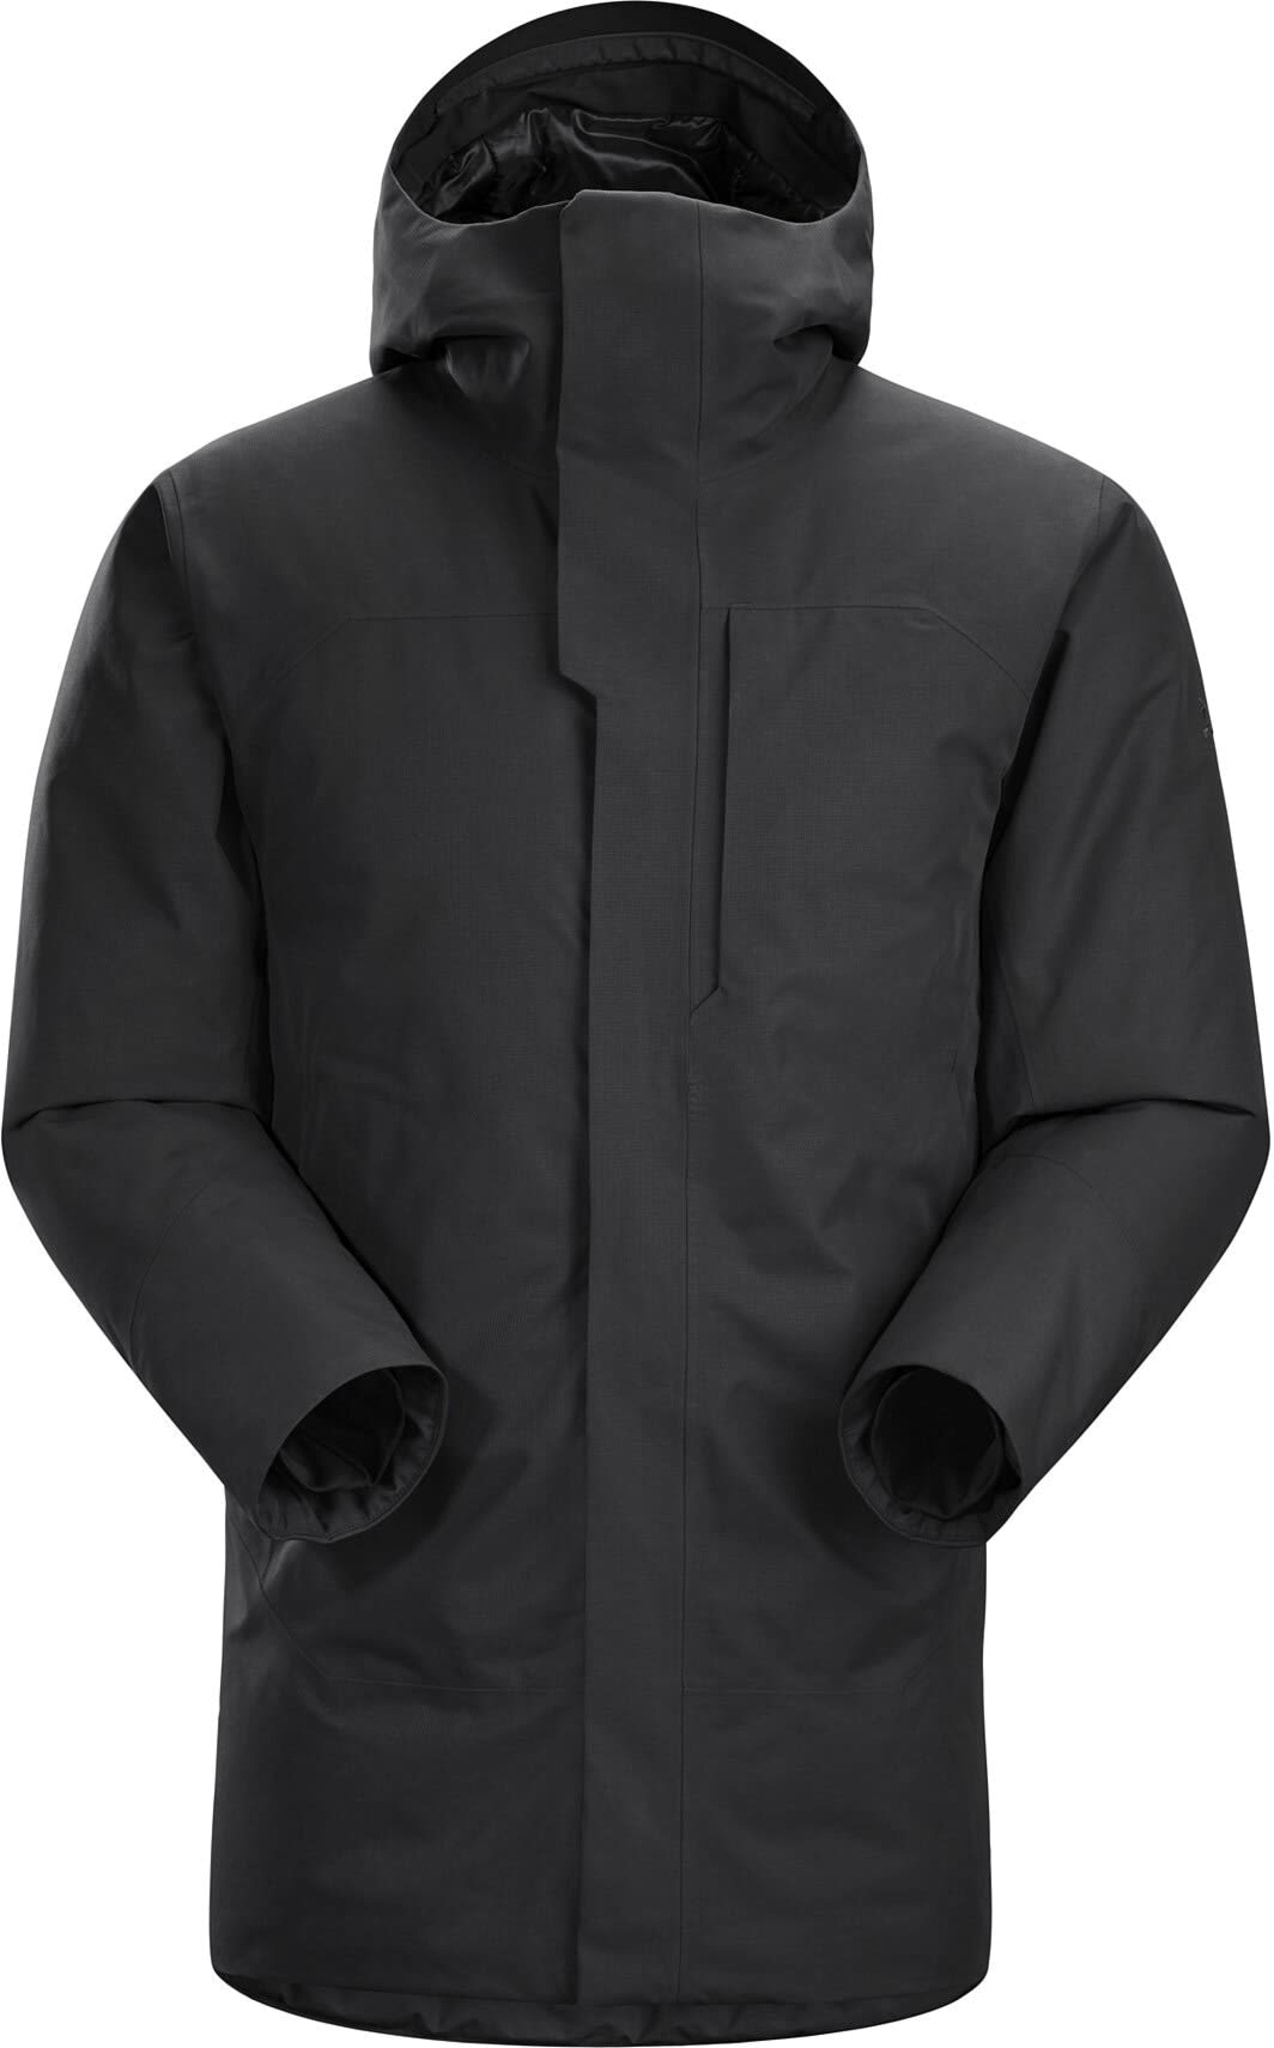 Therme Parka M